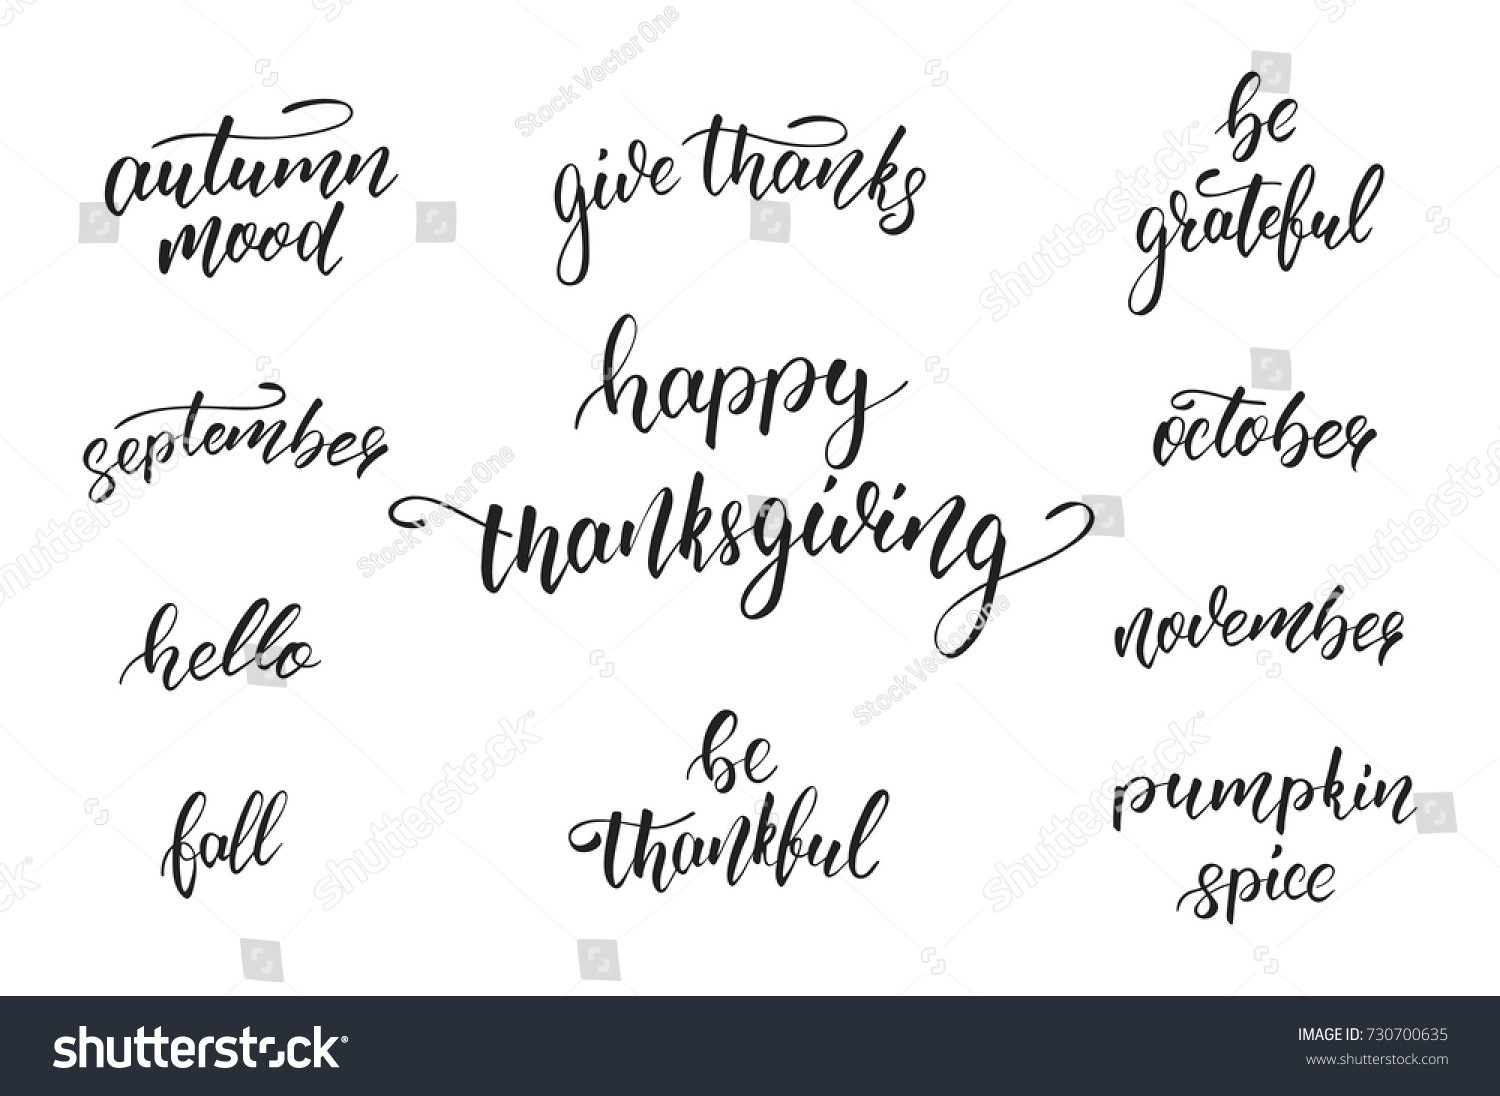 Thanksgiving Quotes Calligraphy
 Thanksgiving Day Calligraphy Quotes Thanksgiving Day Stock